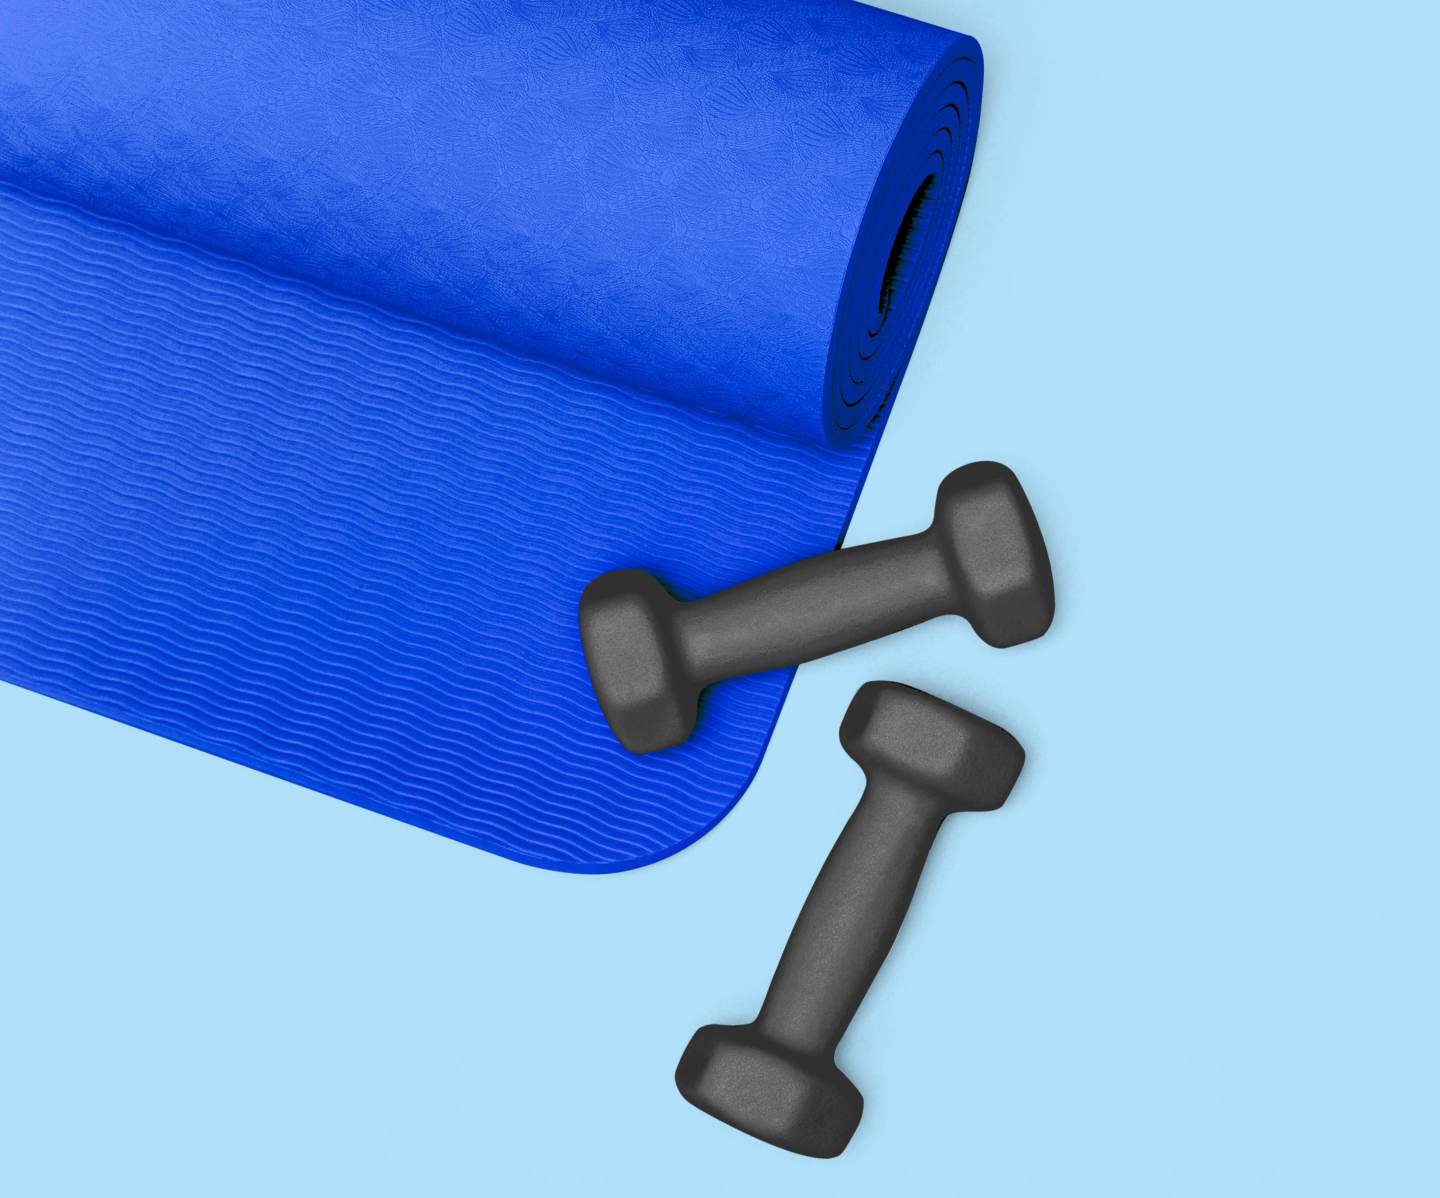 Life – blue yoga mat with weights